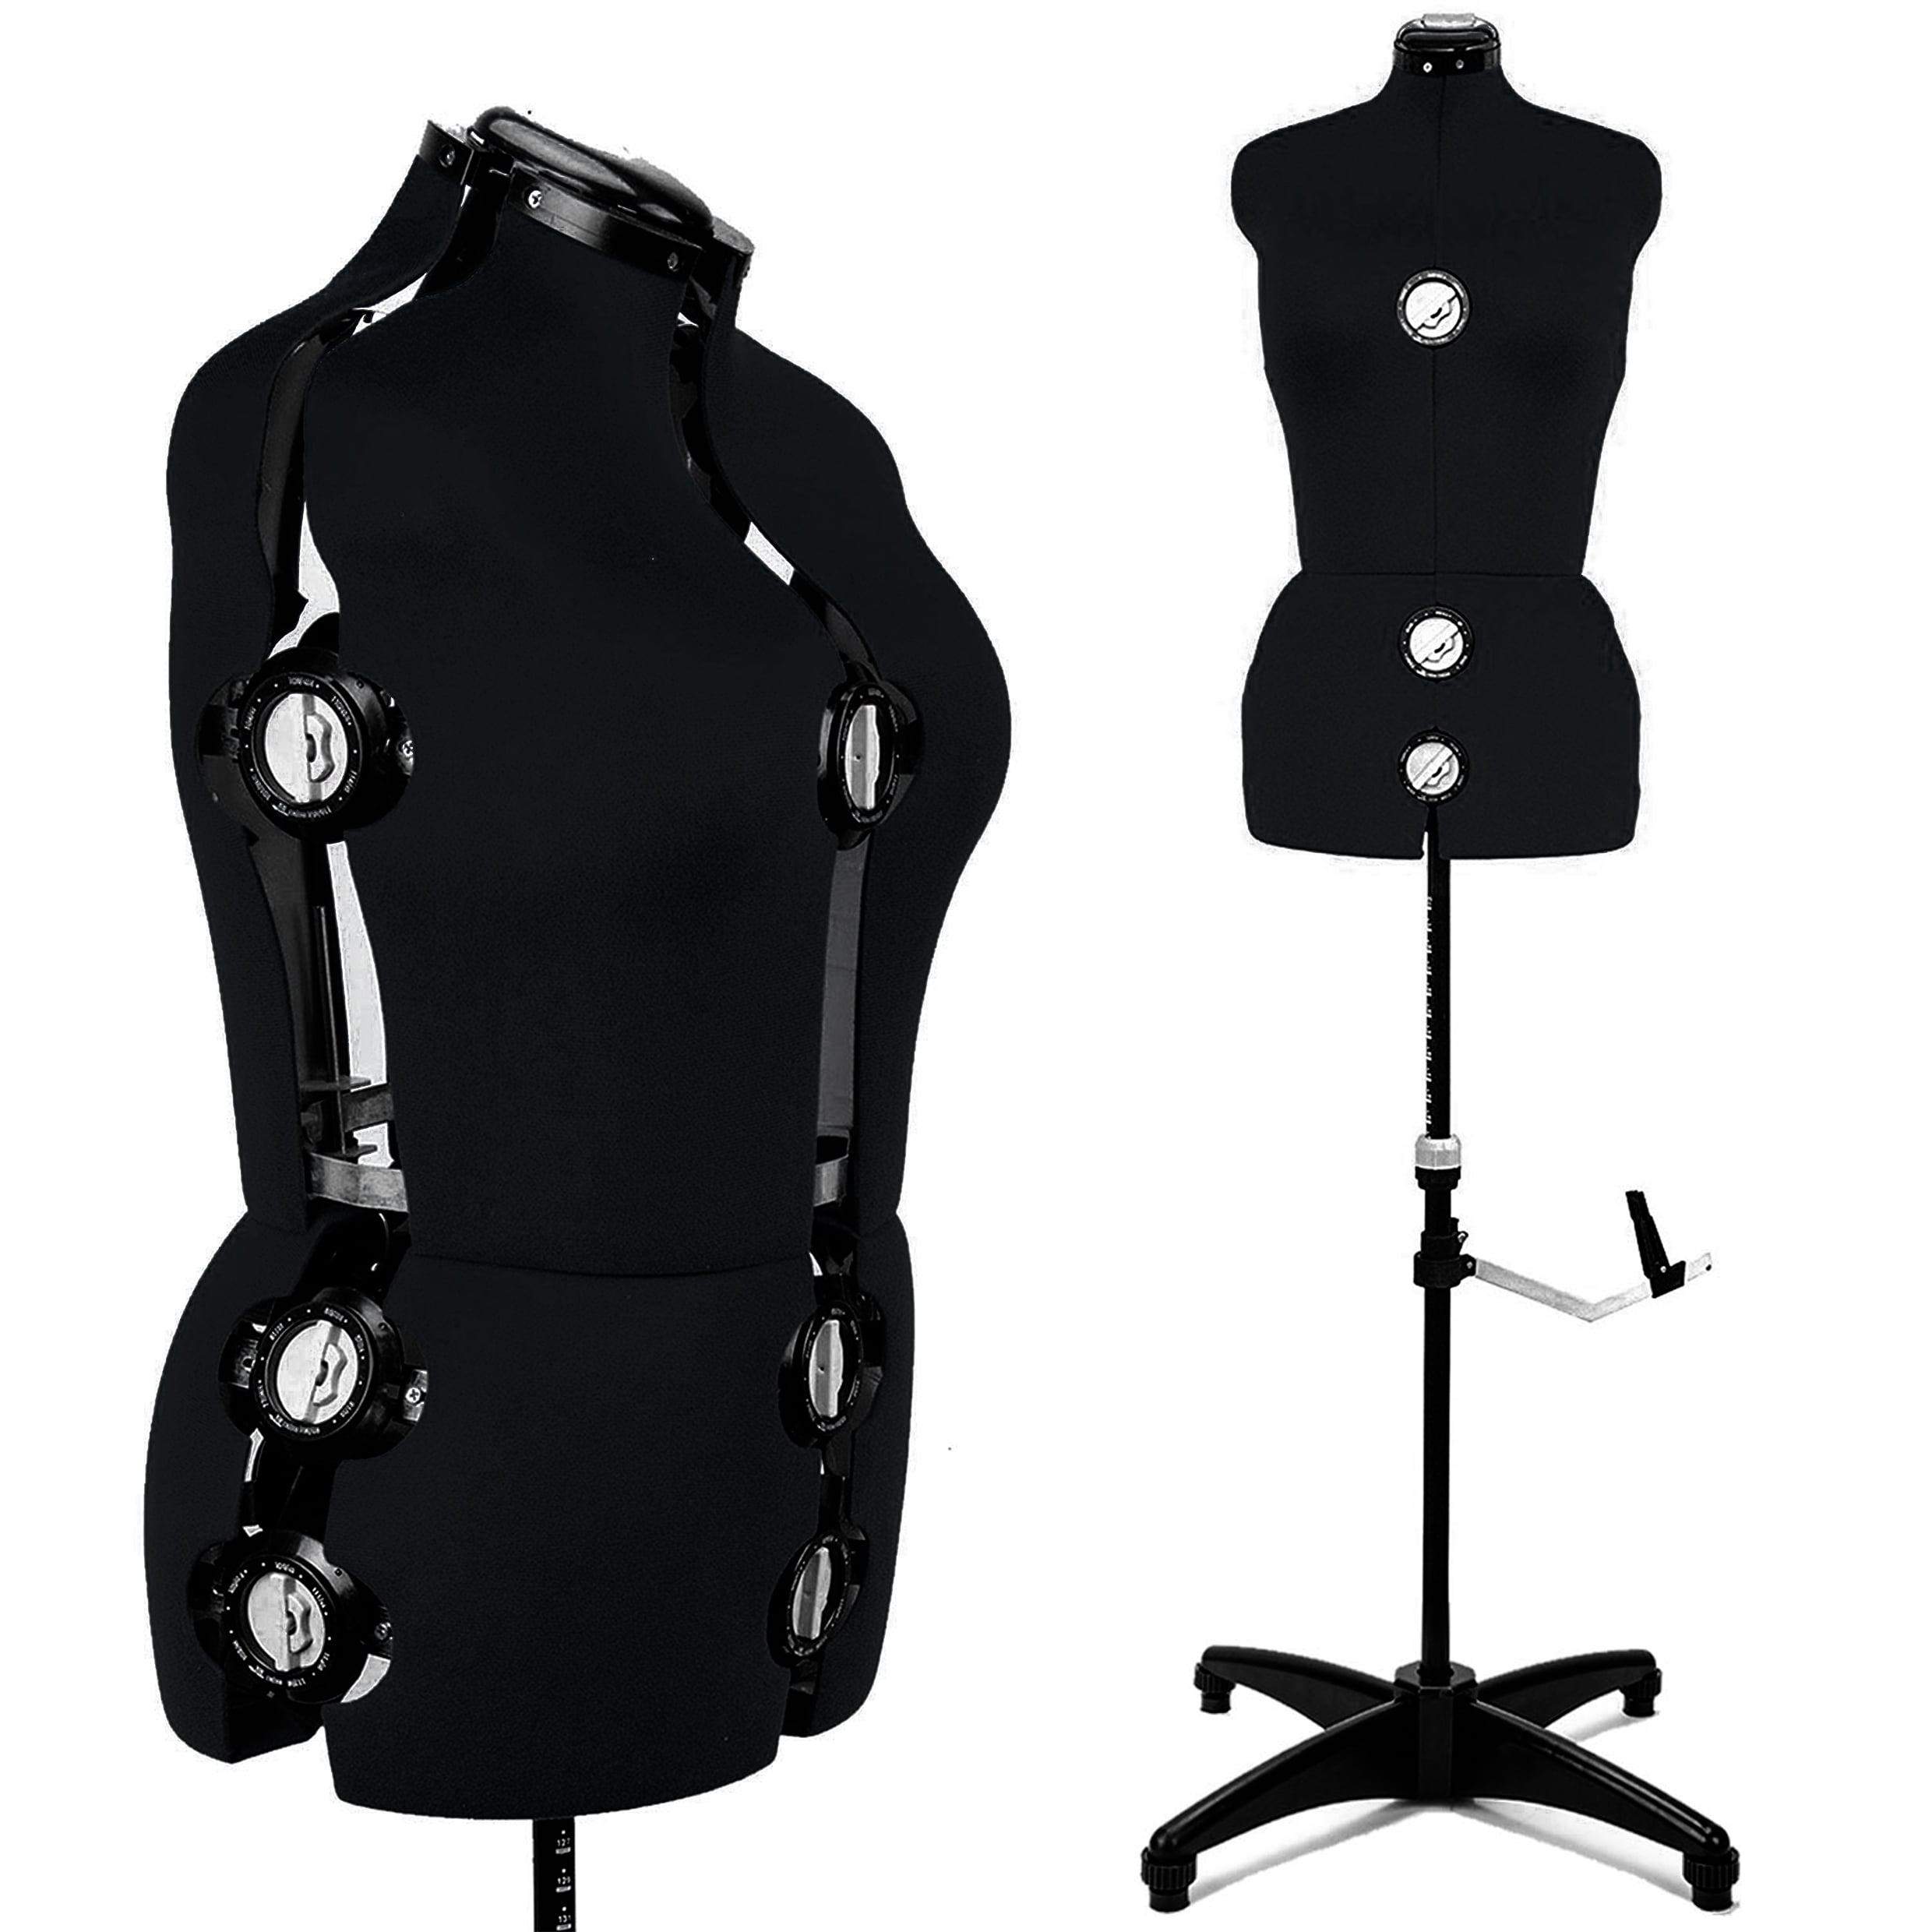 Buy GEX Black Female Fabric Adjustable Mannequin Dress Form for Sewing ...